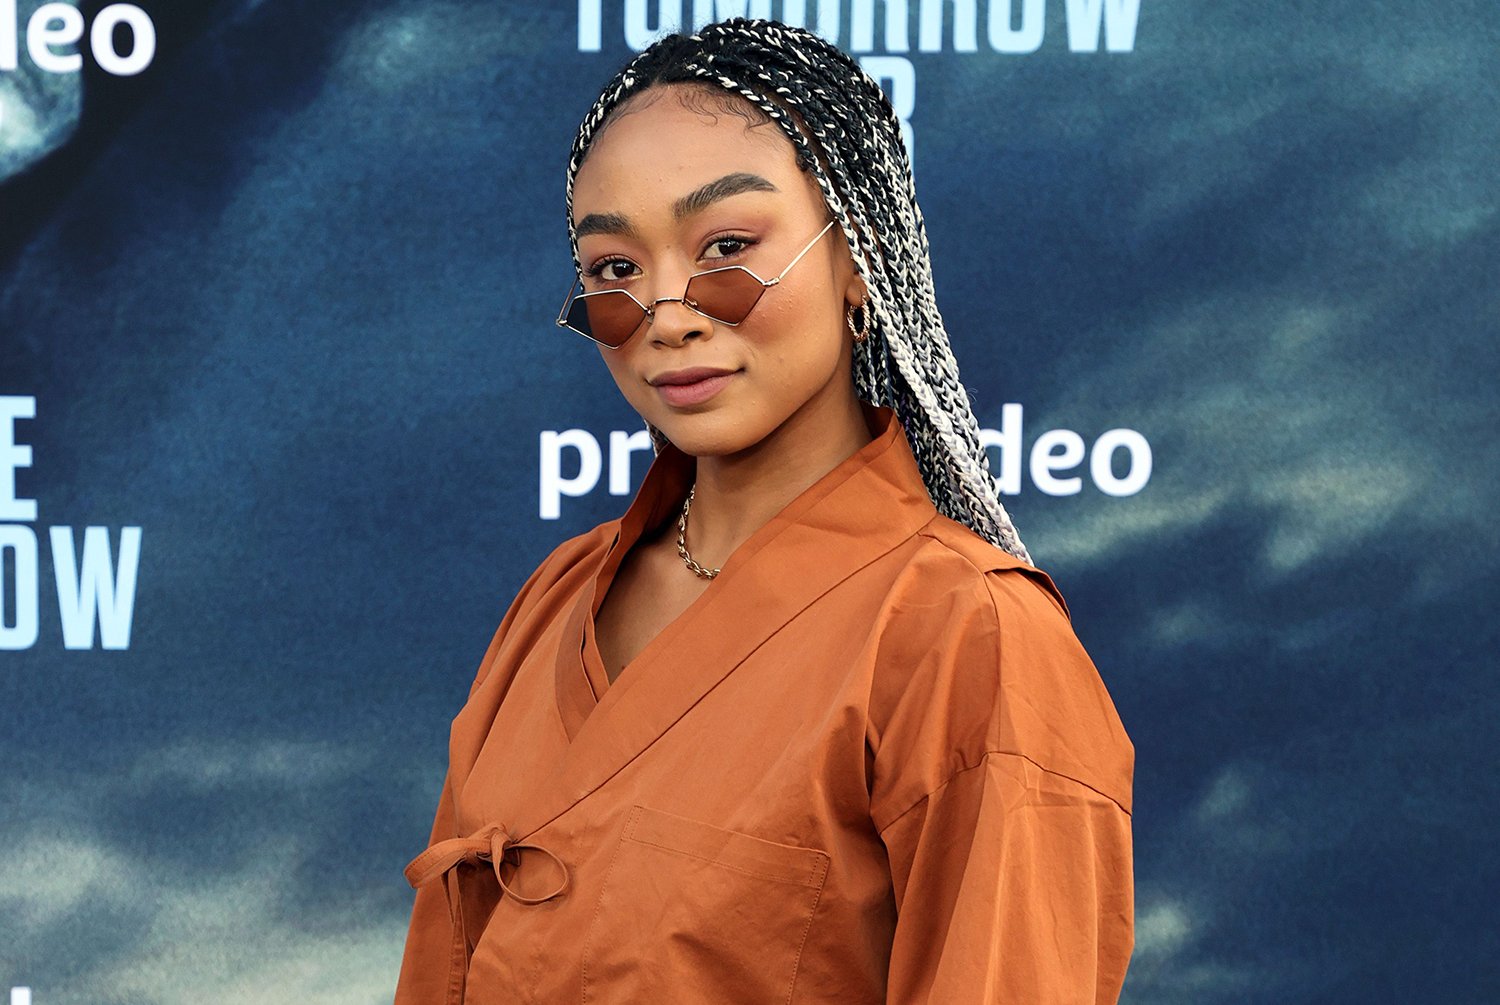 Tati Gabrielle, who plays Braddock in Uncharted, attending the premiere of The Tomorrow War in Los Angeles.